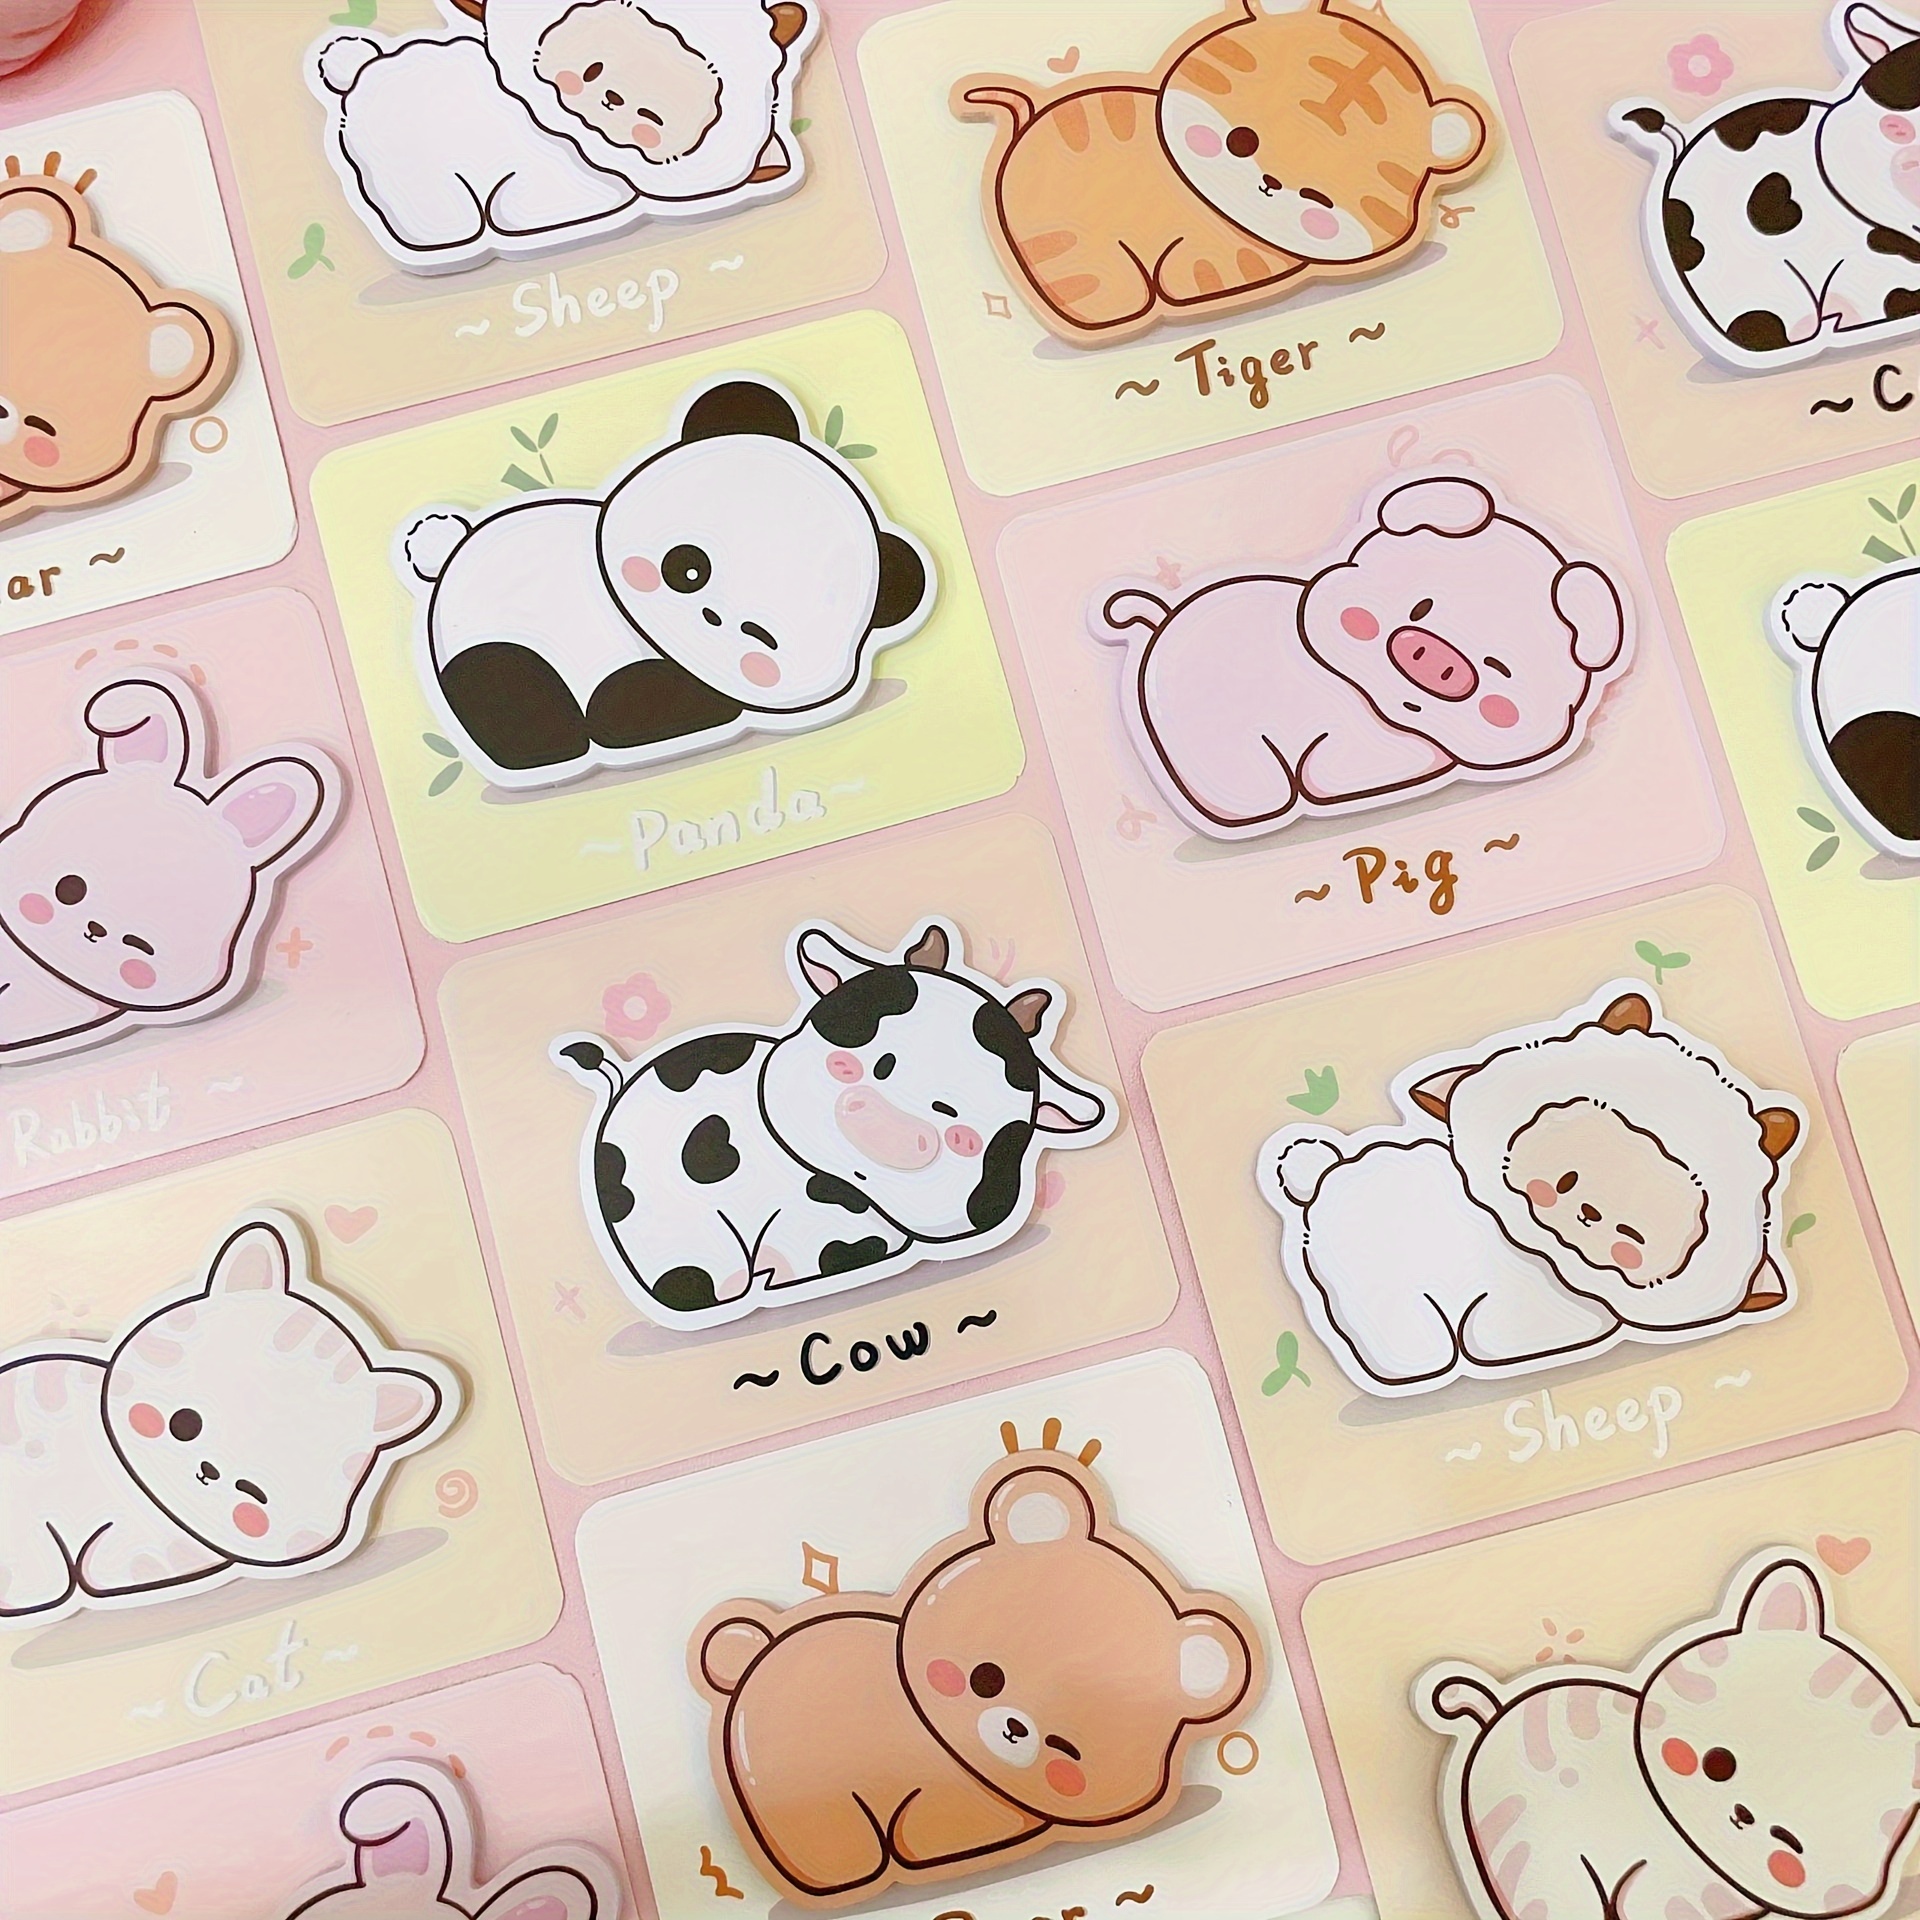 120 Pcs Cute Girl Animal Sticky Notes, Kawaii Animal Pattern Stationery  Decoration Adhesive Sticker Memo Pad for School Supplies(Blue)